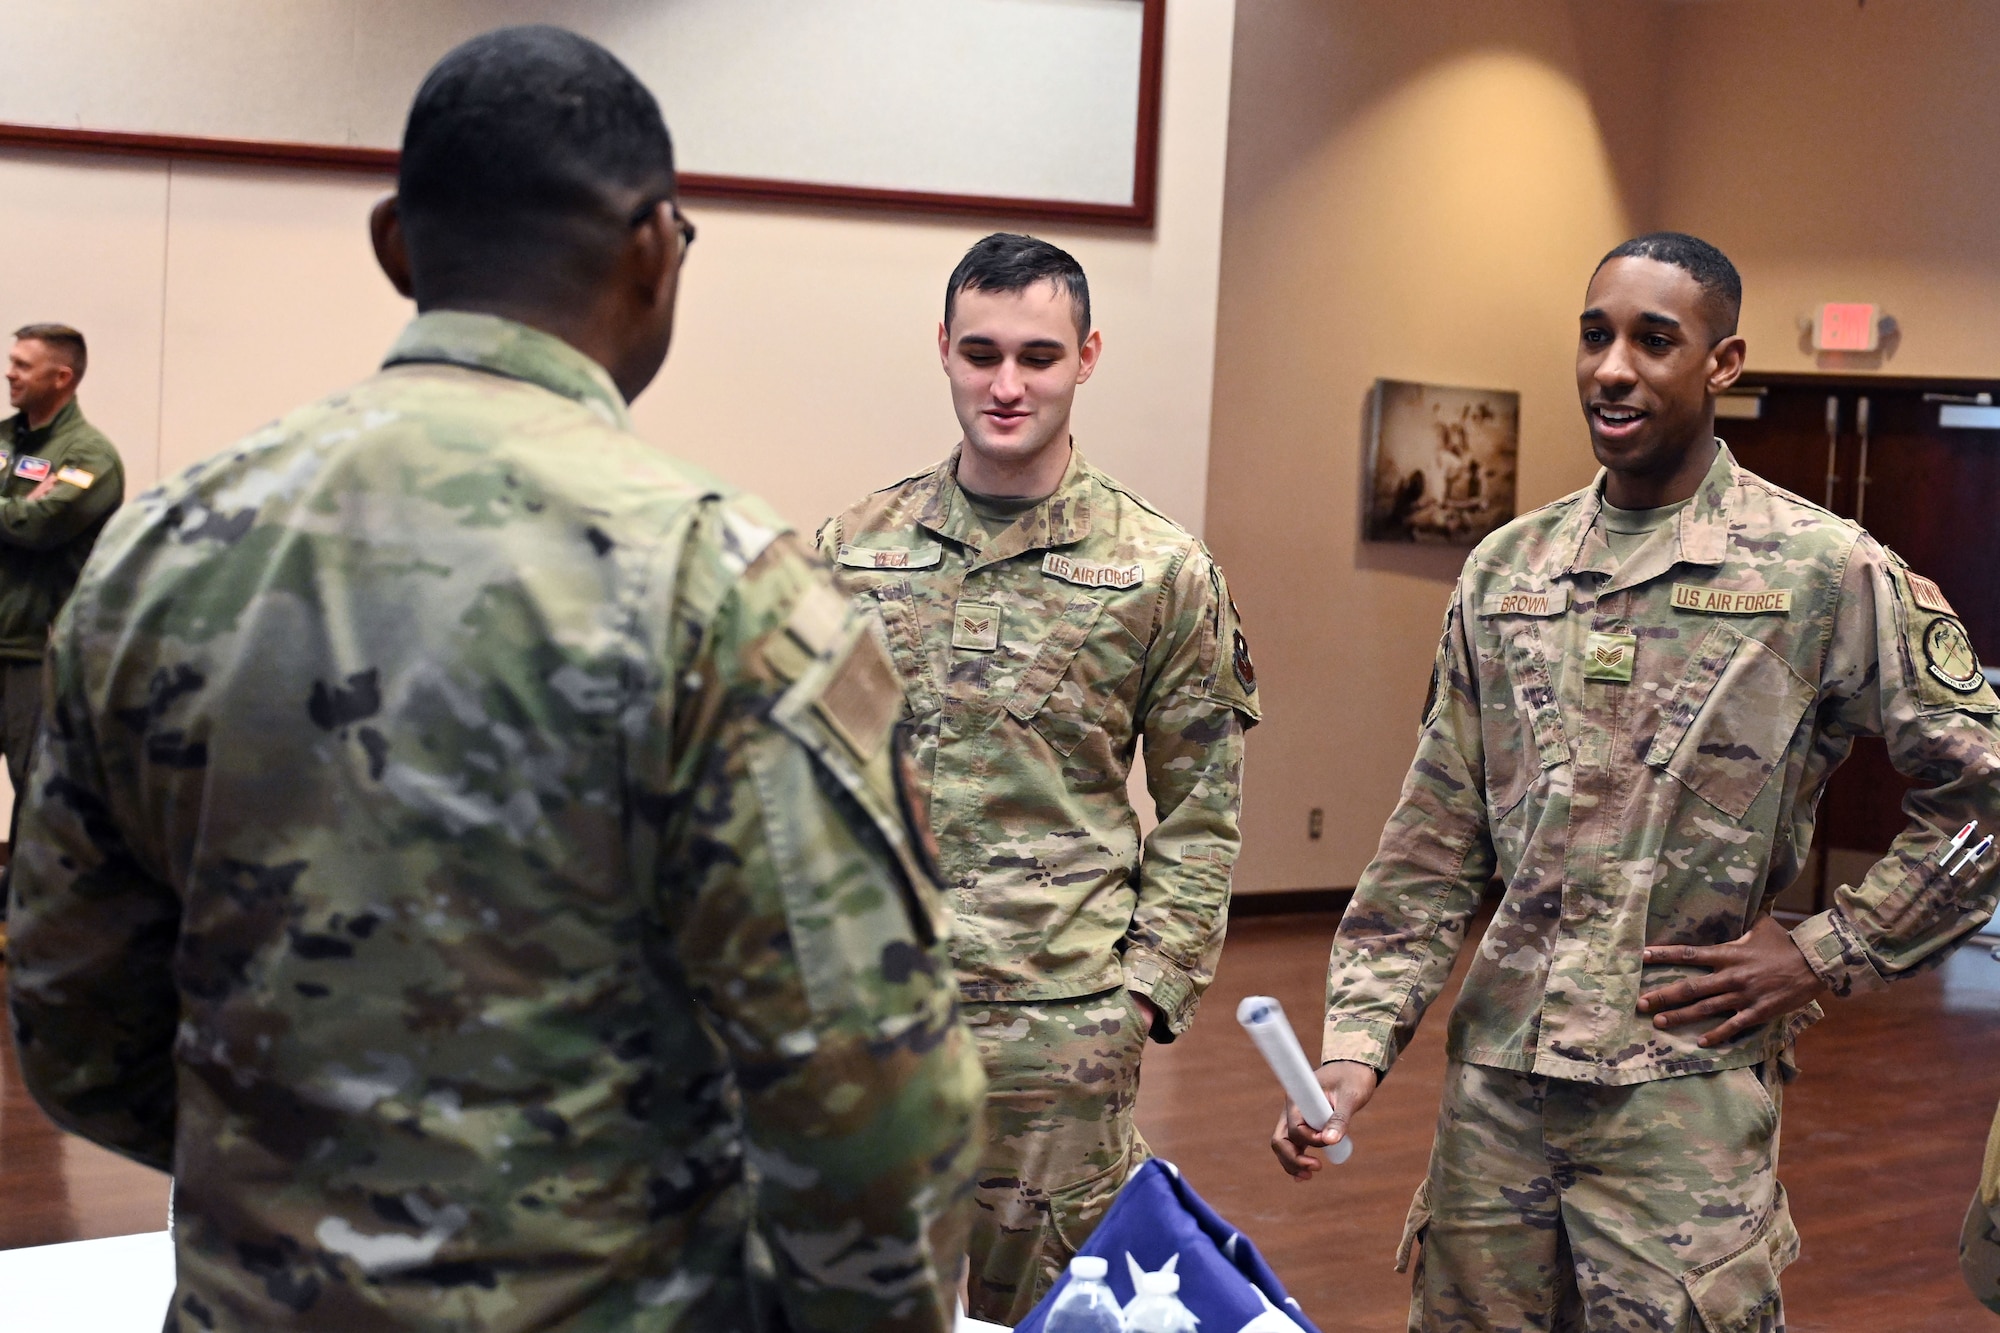 From left, Staff Sgt. Corey Smith, 97th Force Support Squadron honor guard noncommissioned officer in charge, speaks with Senior Airman Isaiah Vega and Staff Sgt. Marquis Brown, 97th Civil Engineer Squadron (CES) electrical power production journeymen, at a developmental special duties fair at Altus Air Force Base, Oklahoma, March 2, 2023. Smith talked with Airmen about future opportunities with the honor guard and recent changes to policies affecting honor guardsmen. (U.S. Air Force photo by Master Sgt. Nathan Allen)